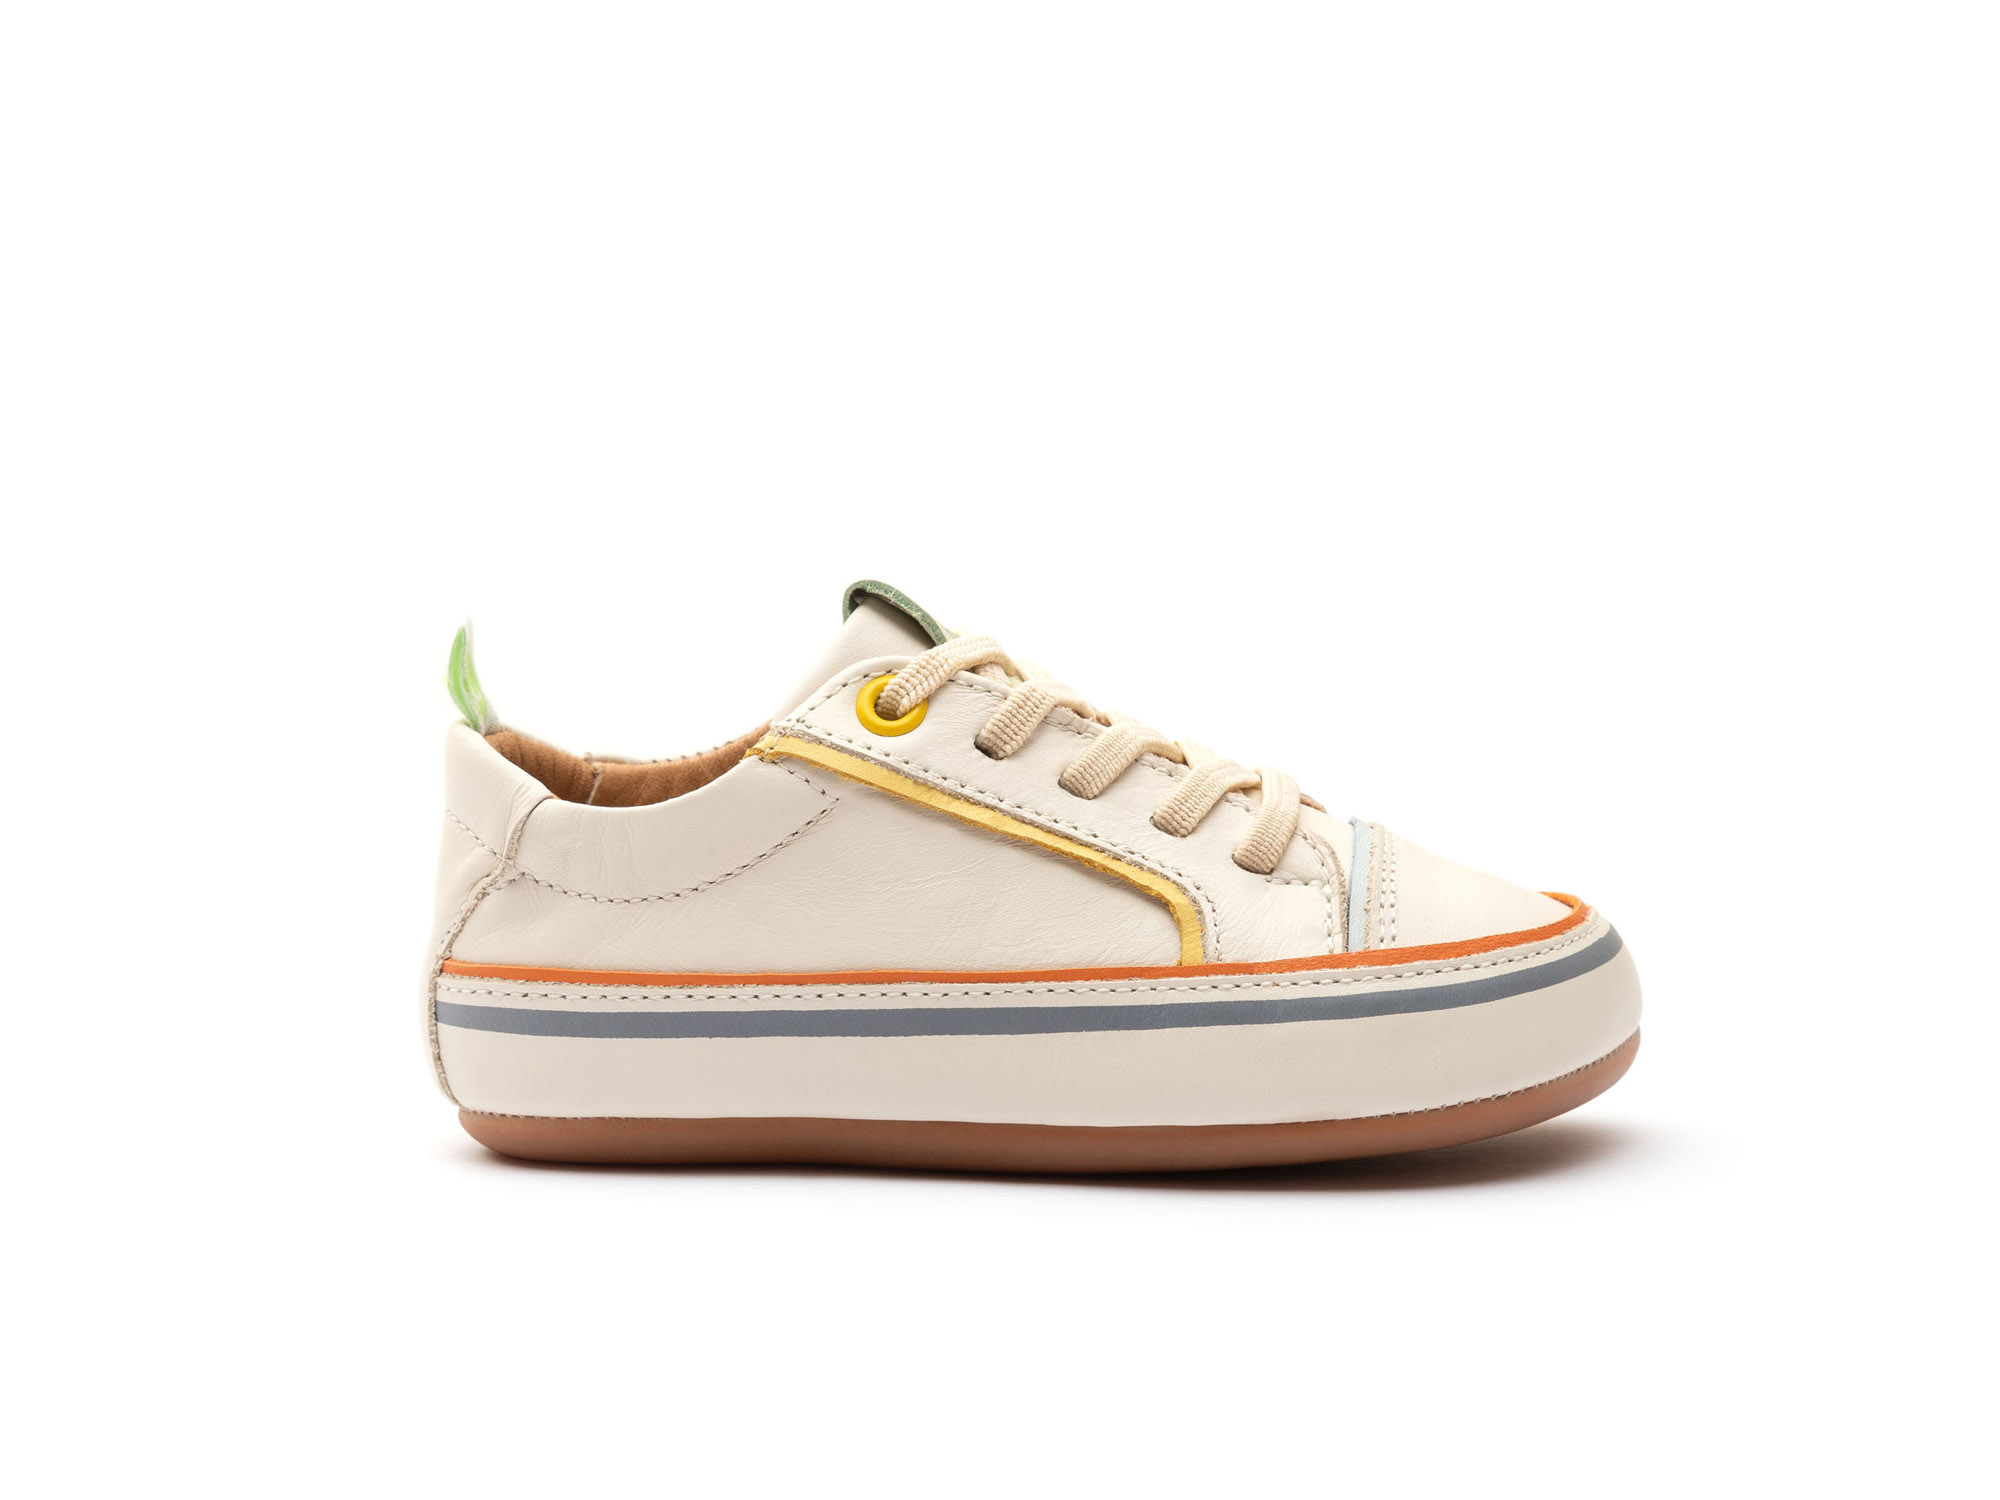 UP & GO Sneakers for Unissex Funky Colors | Tip Toey Joey - Australia - 4